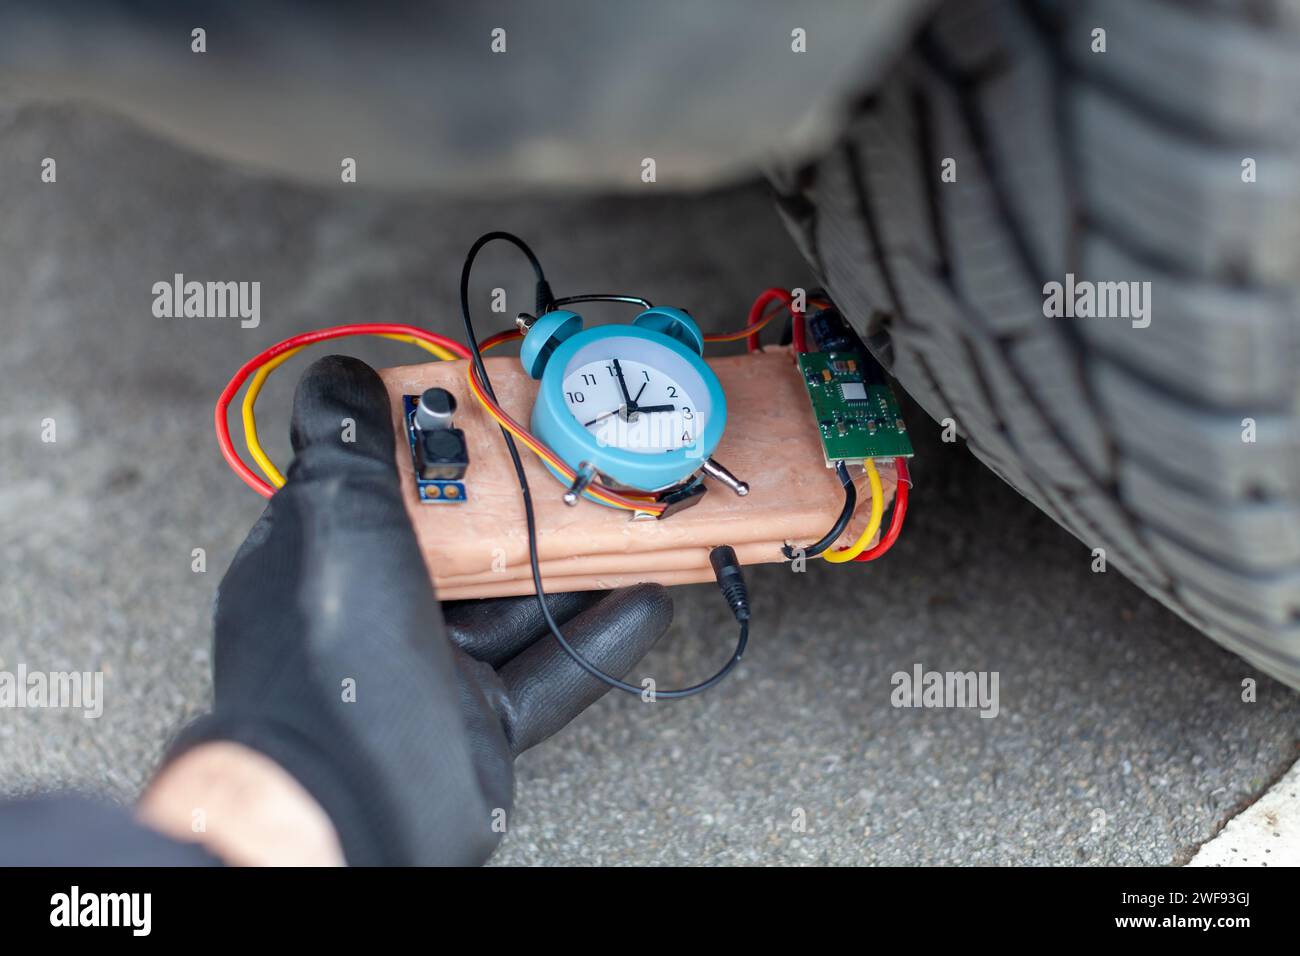 mobster placing a time bomb under vehicle Stock Photo